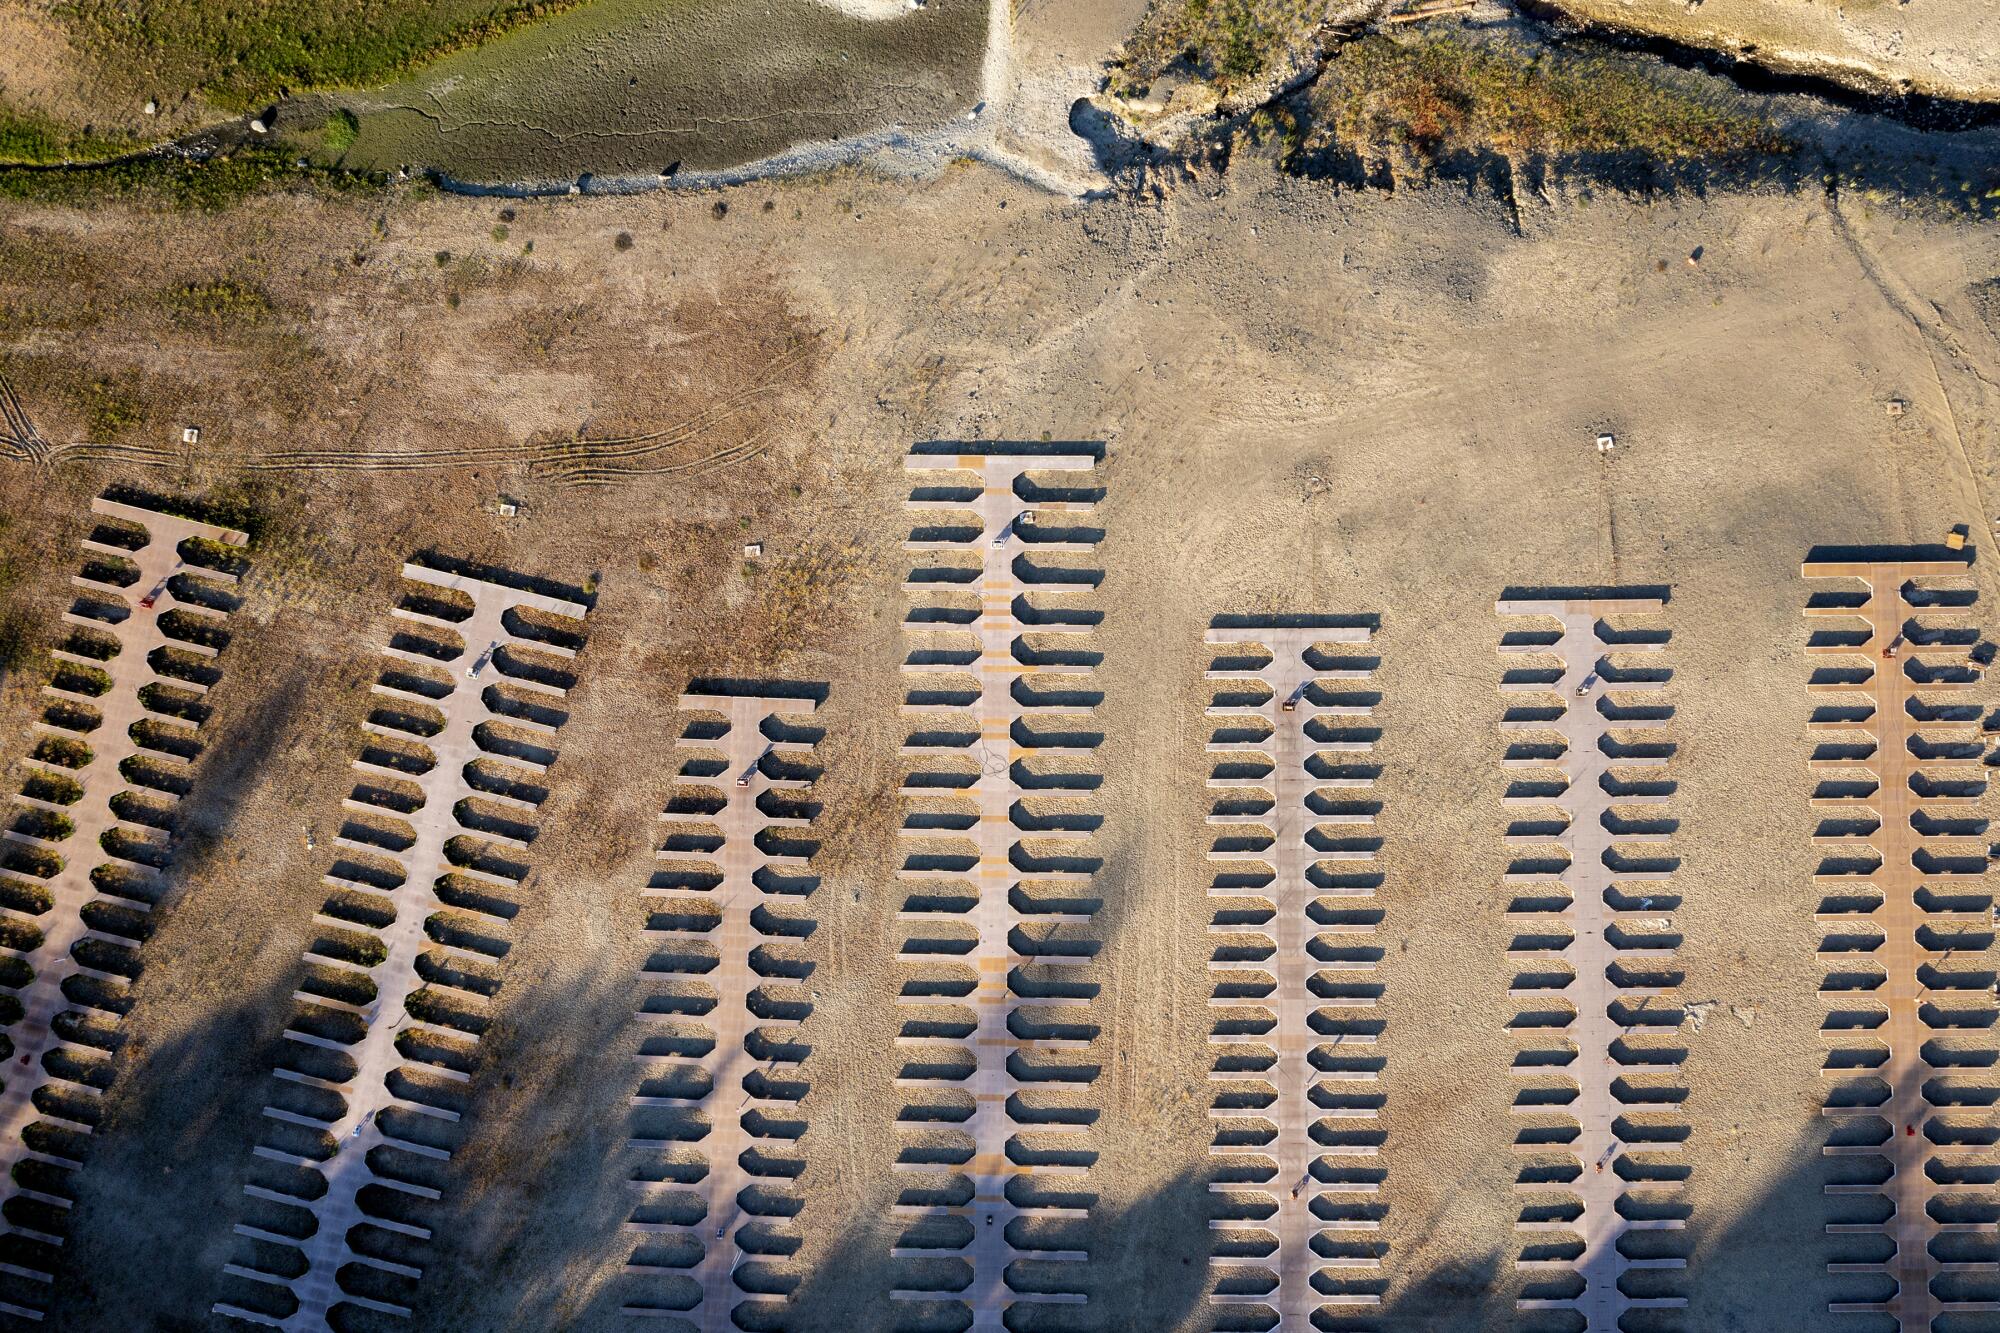 Boat slips lay stranded on dry land at drought-stricken Folsom Lake.